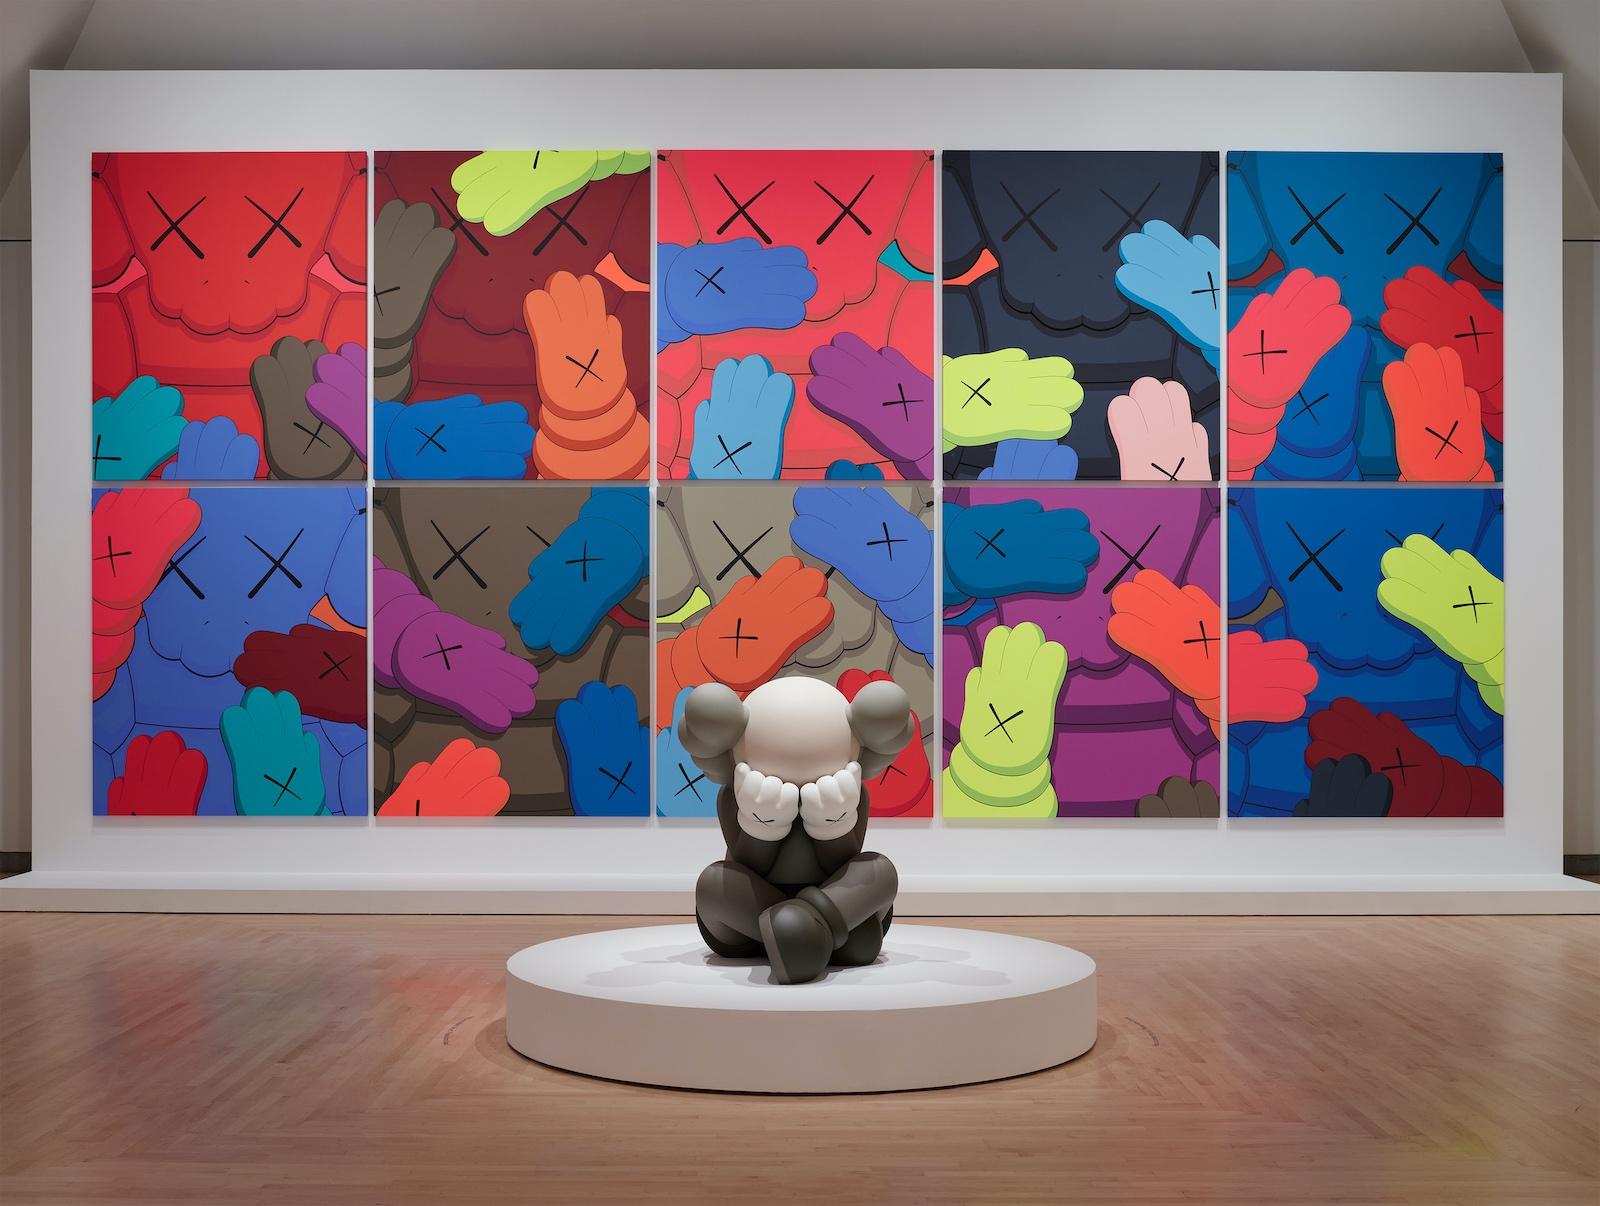 From Graffiti to Augmented Reality: KAWS at the Brooklyn Museum